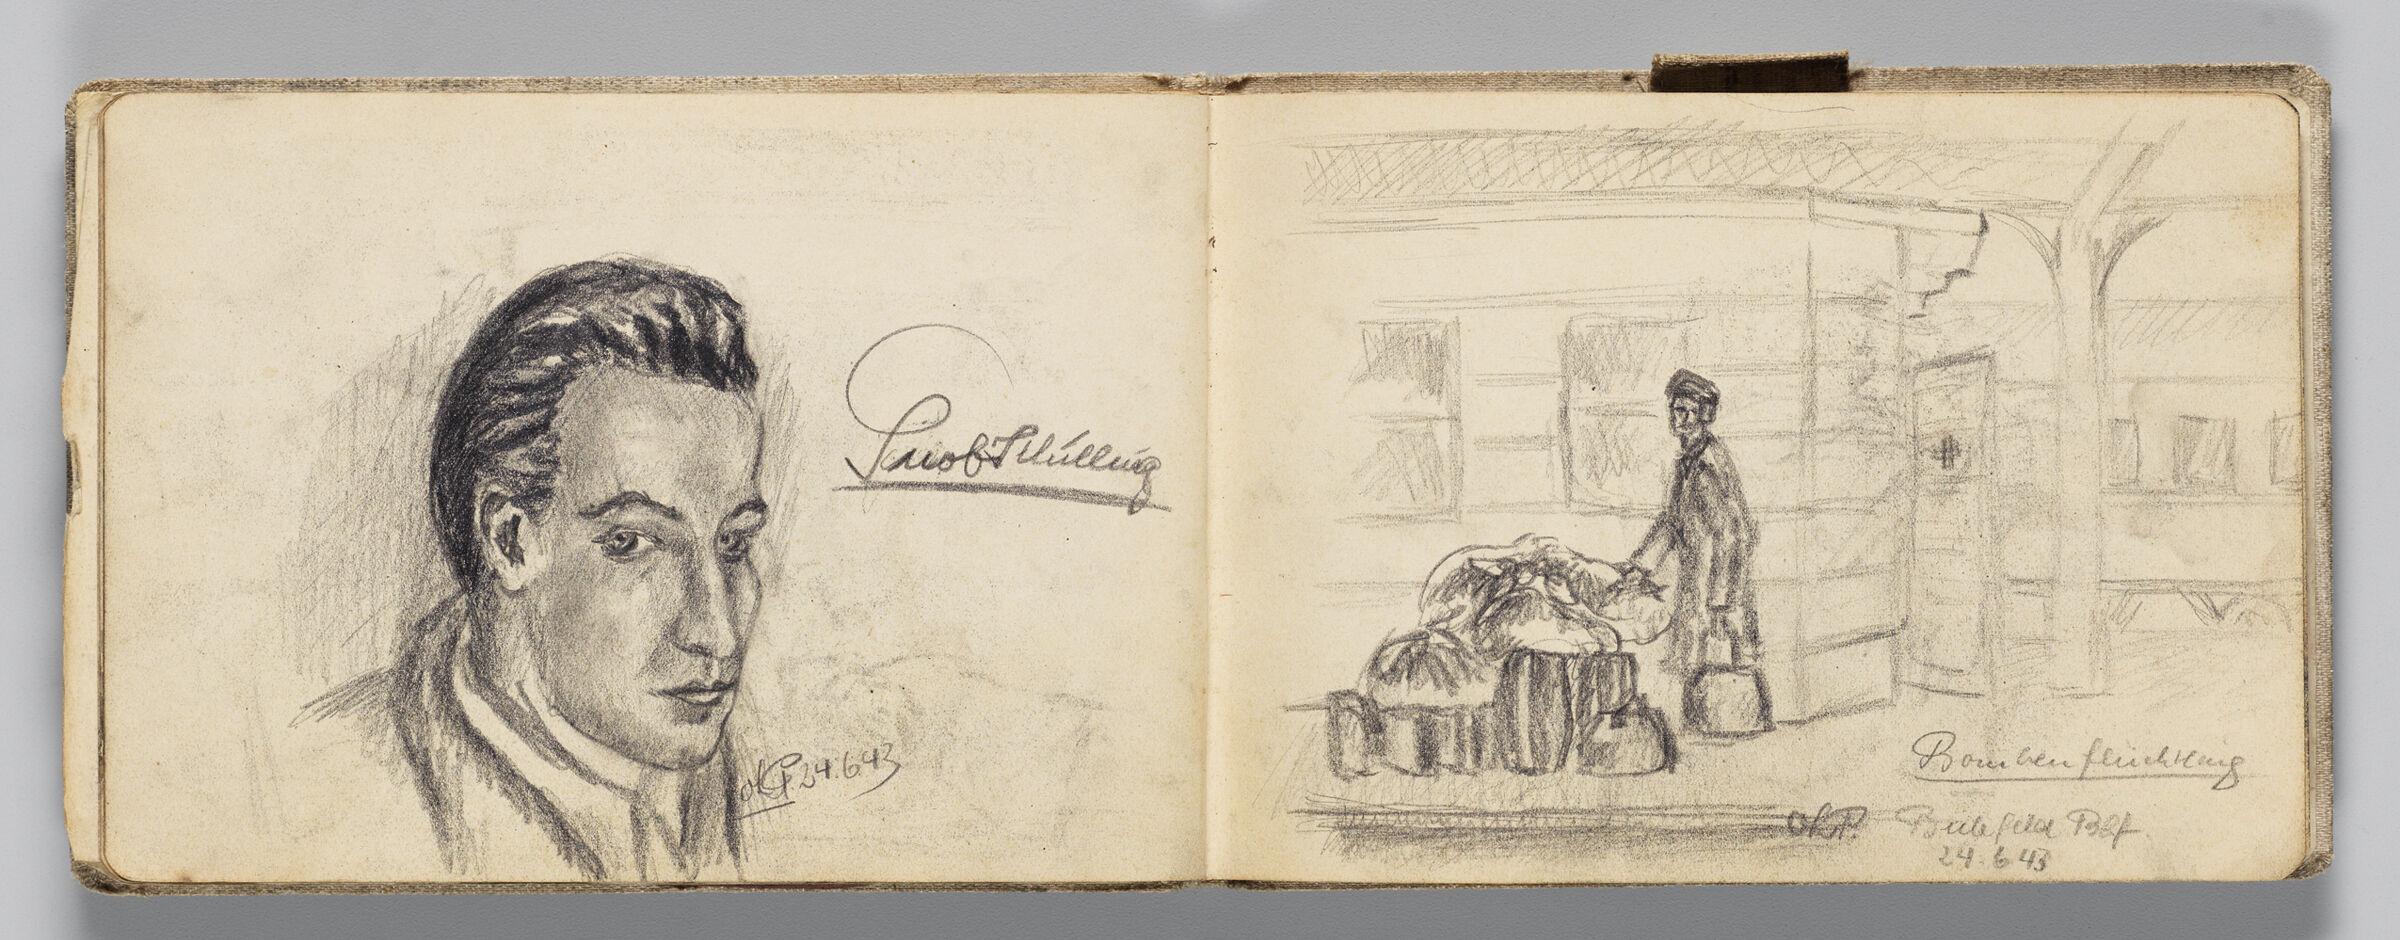 Untitled (Portrait Of Young Man, Left Page); Untitled (Sketch Of Woman On Street, Right Page)